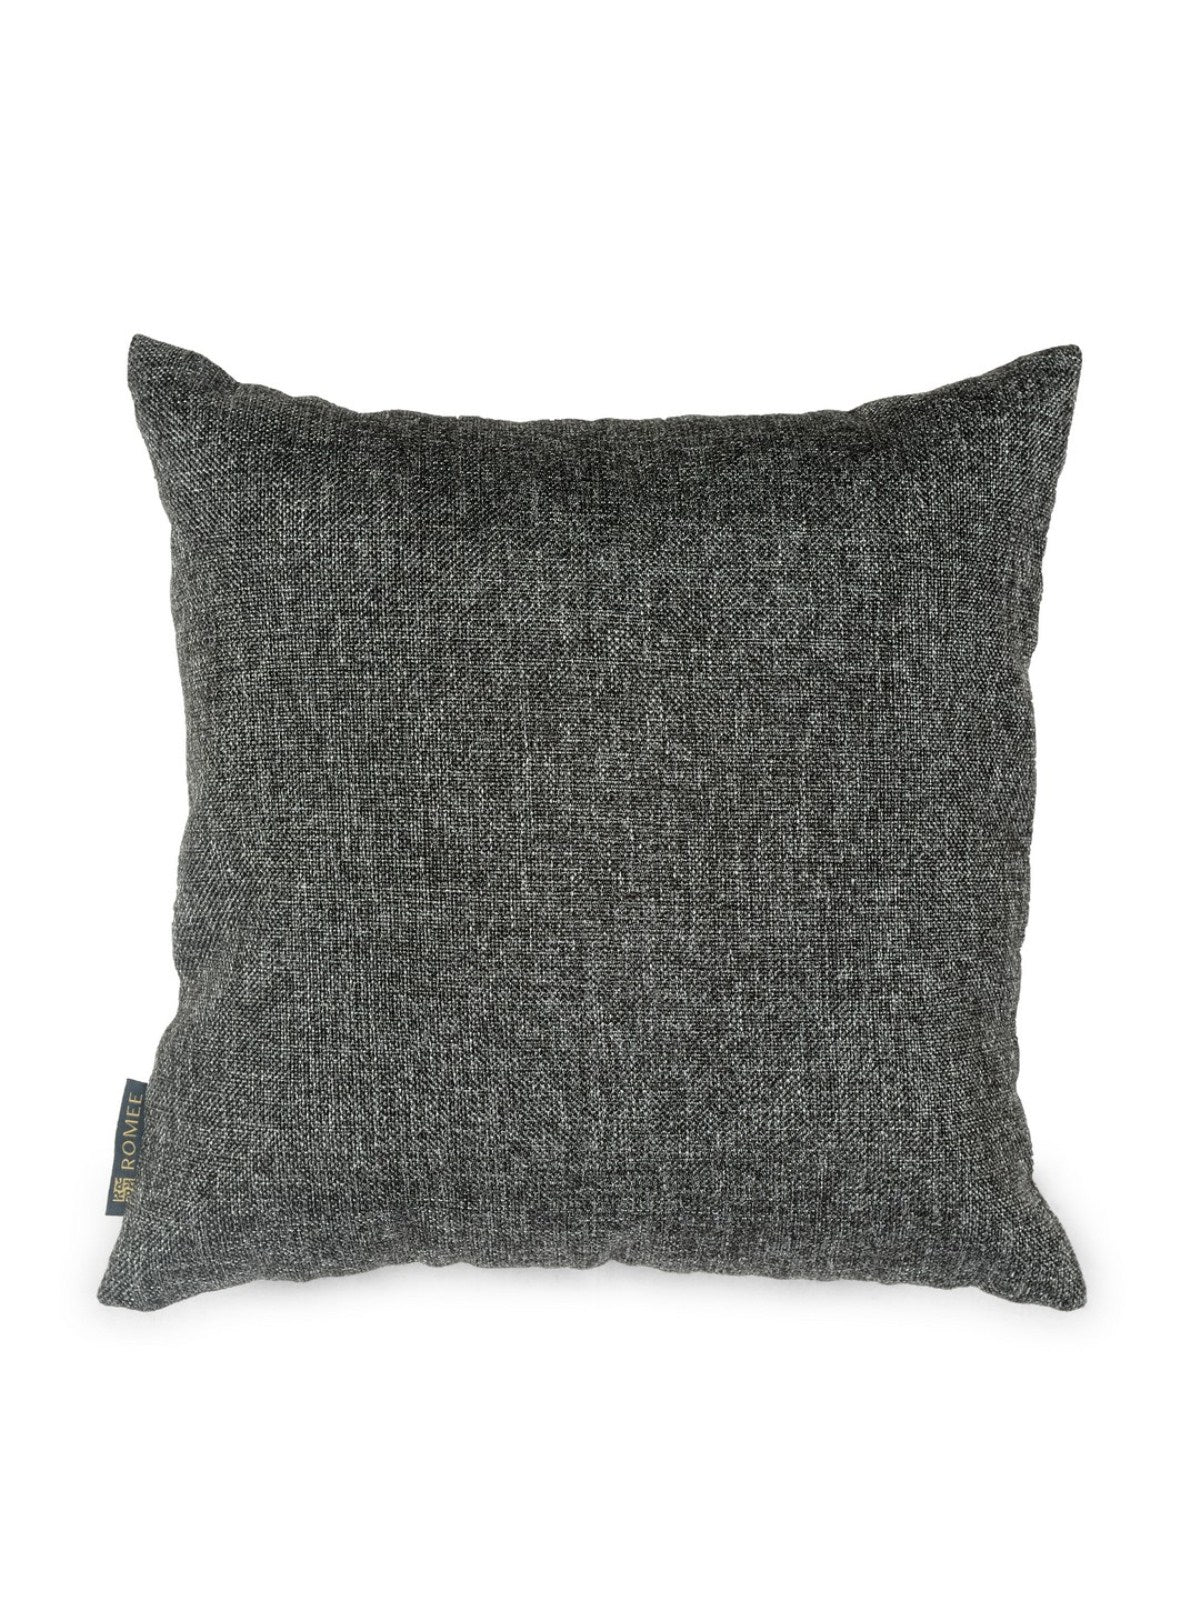 Polyester Jute Solid Plain Cushion Cover 16 inch x 16 inch, Set of 5 - Grey